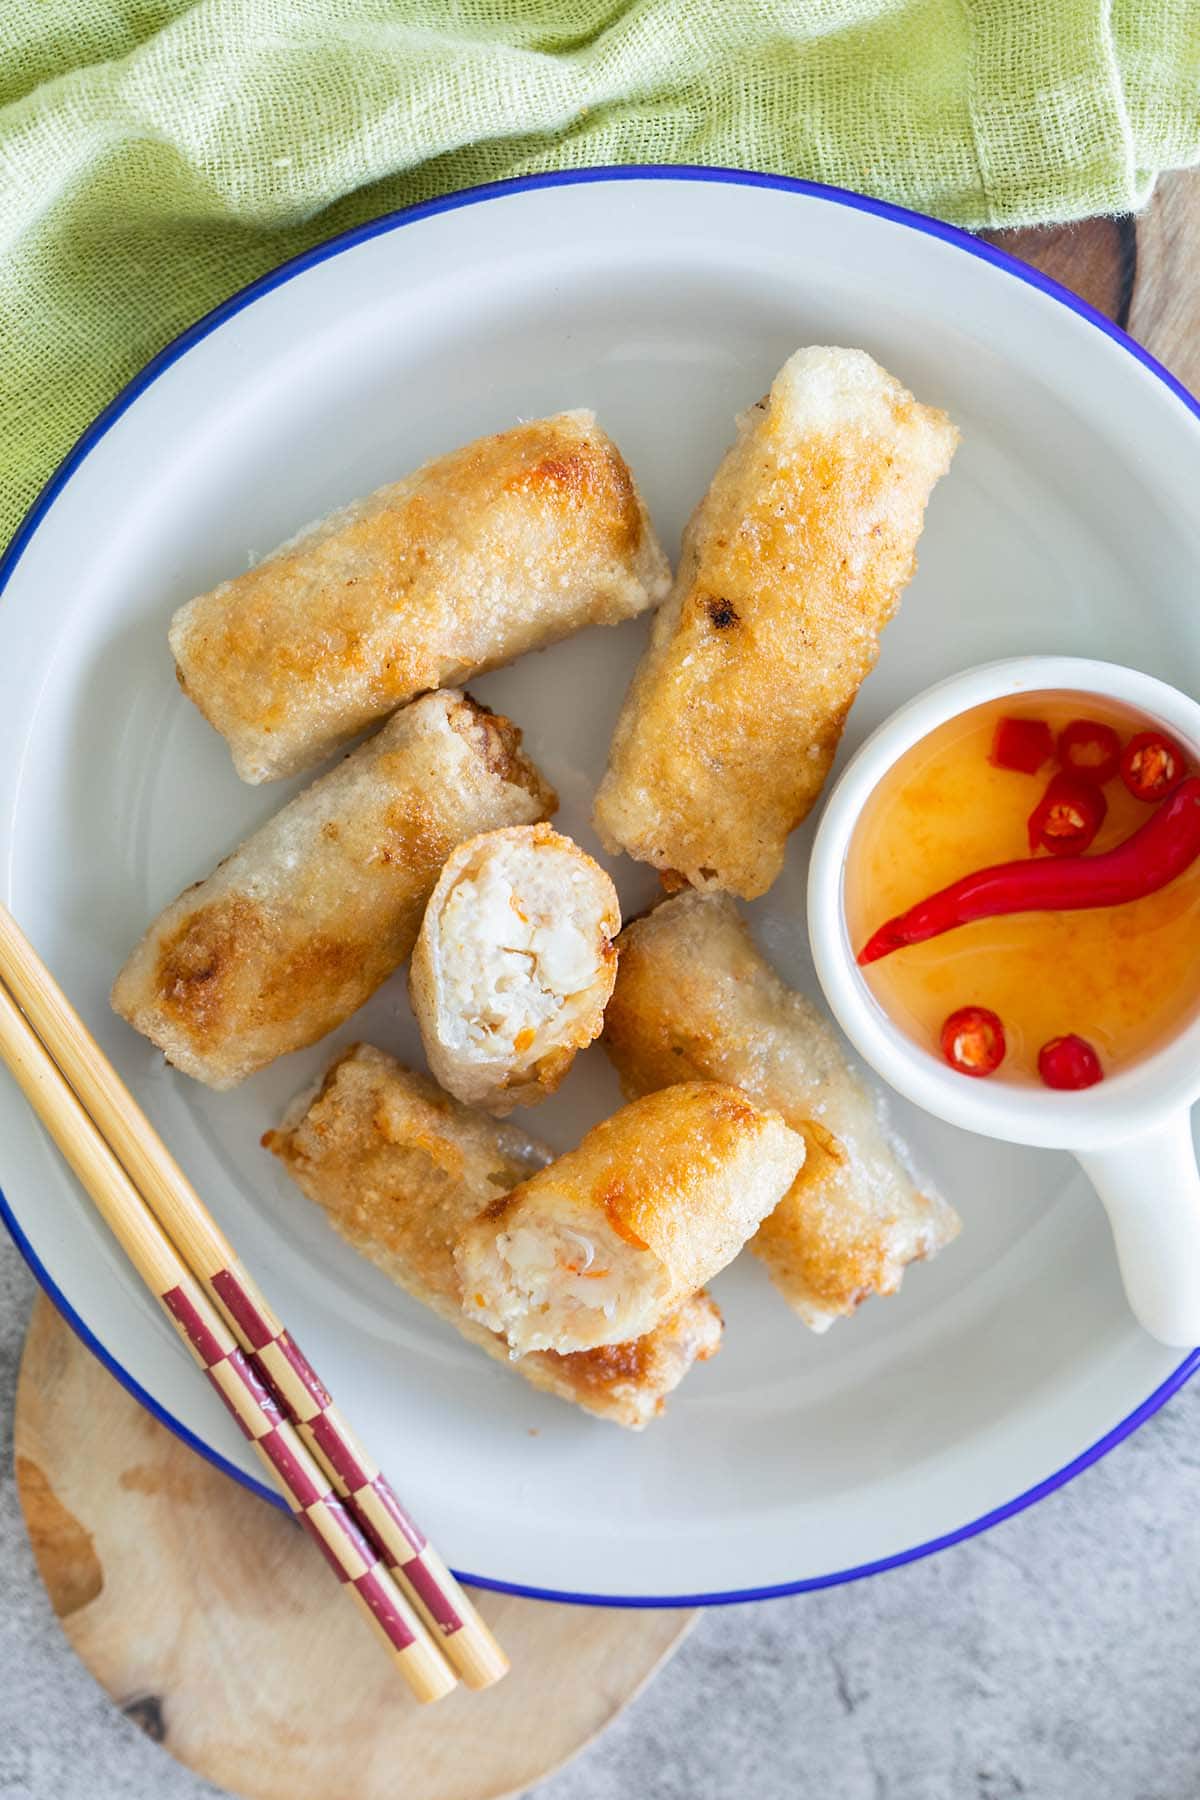 Best Vietnamese spring rolls (Cha Gio) recipe. These crispy fried Vietnamese rolls are crispy with ground pork filling and served with a dipping sauce.